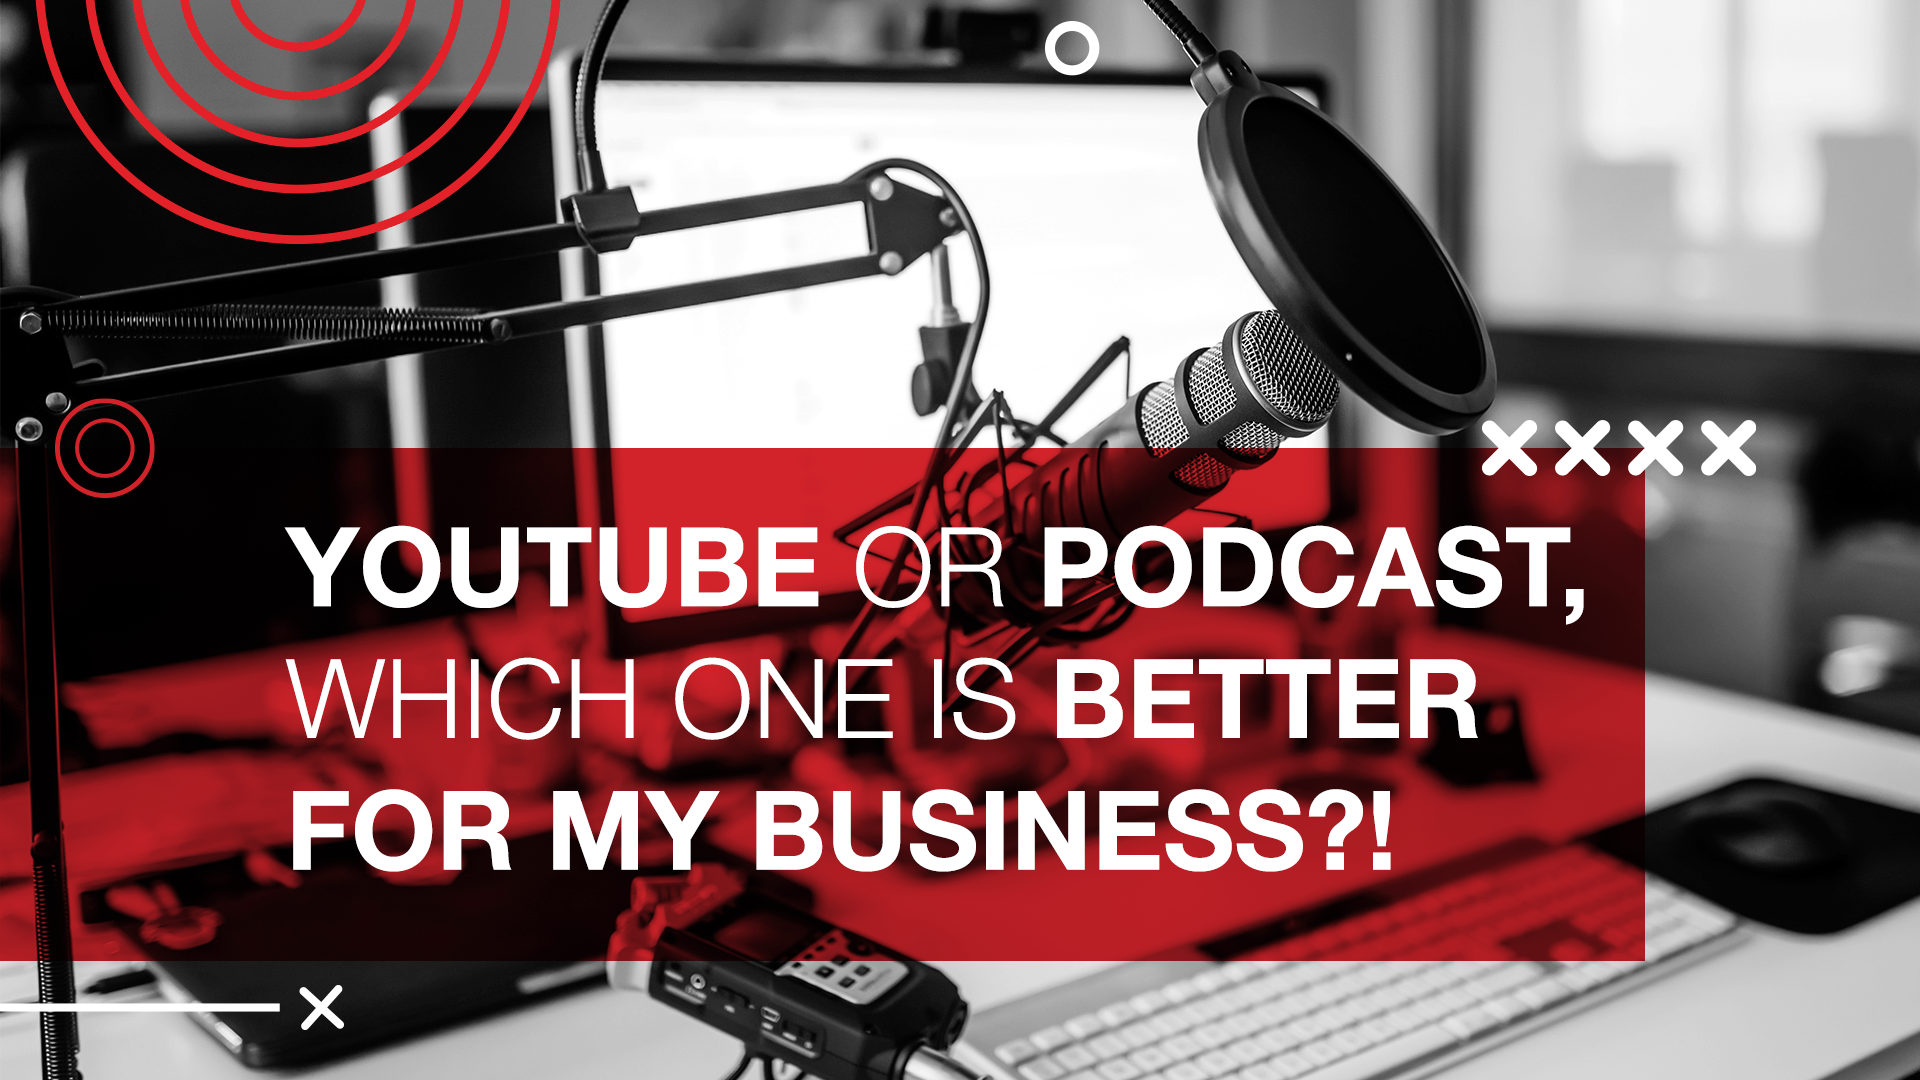 YouTube or Podcasting, which one is better for my business